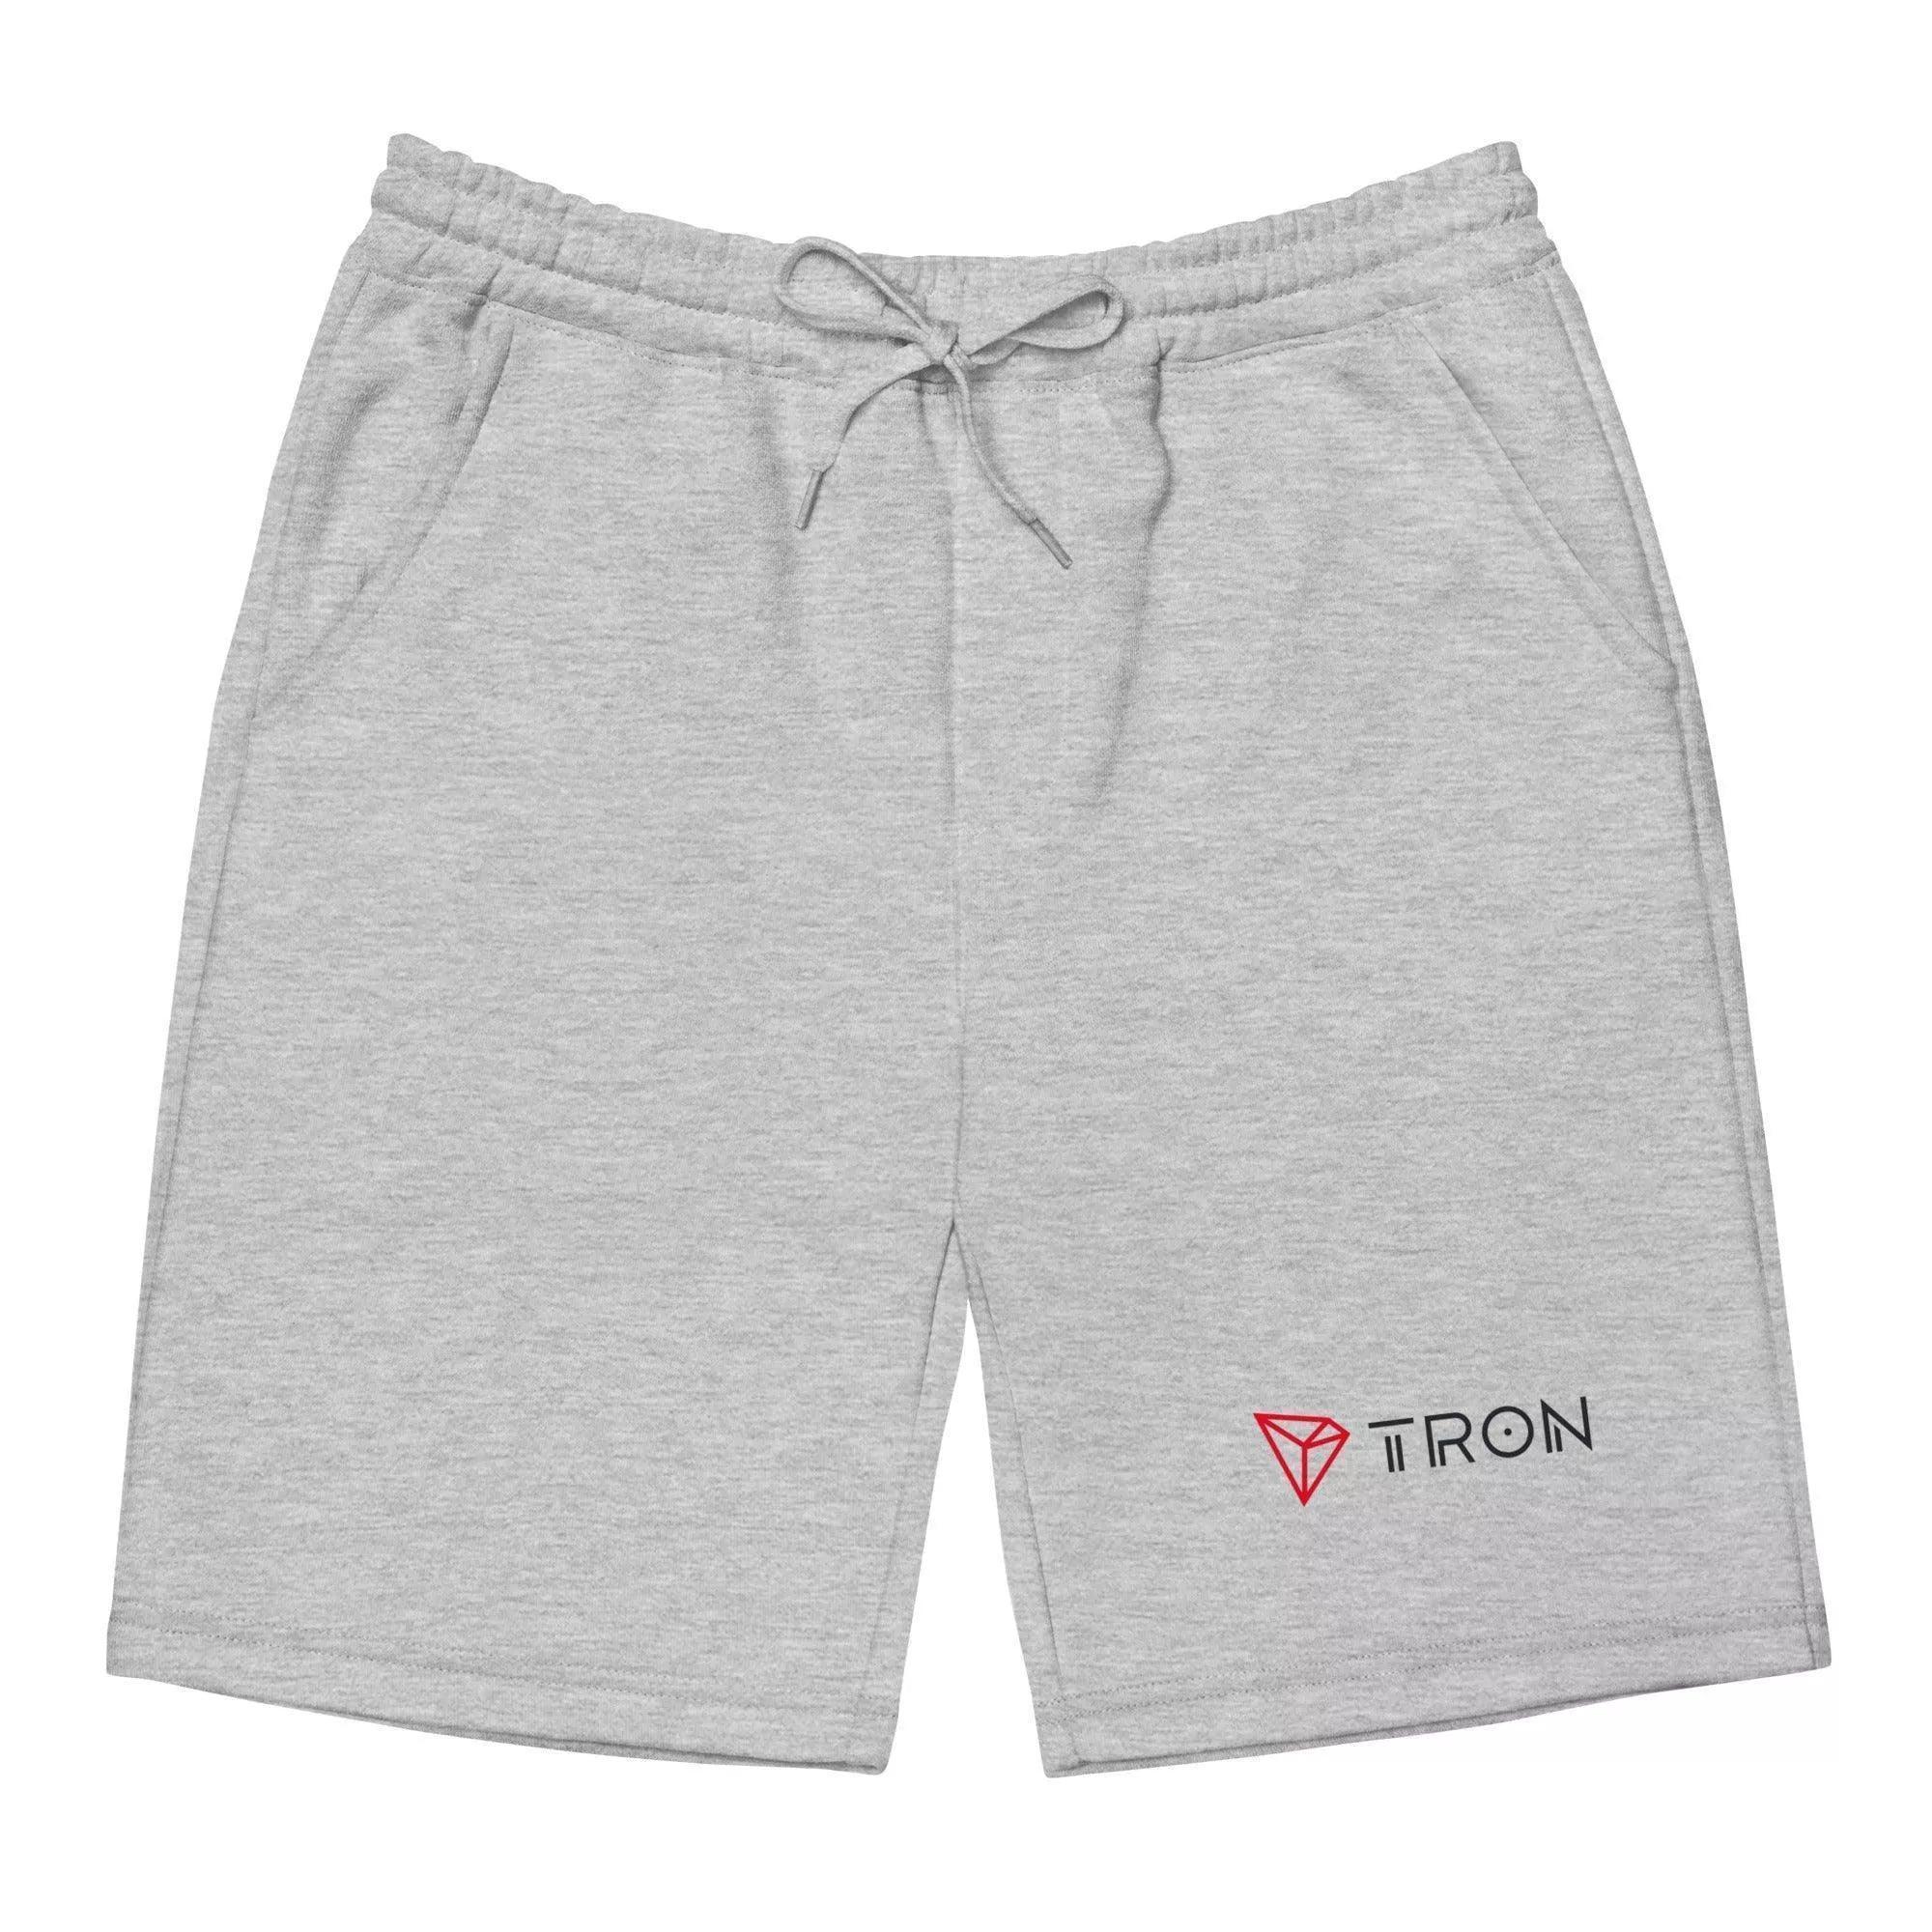 Tron 2 Shorts - InvestmenTees